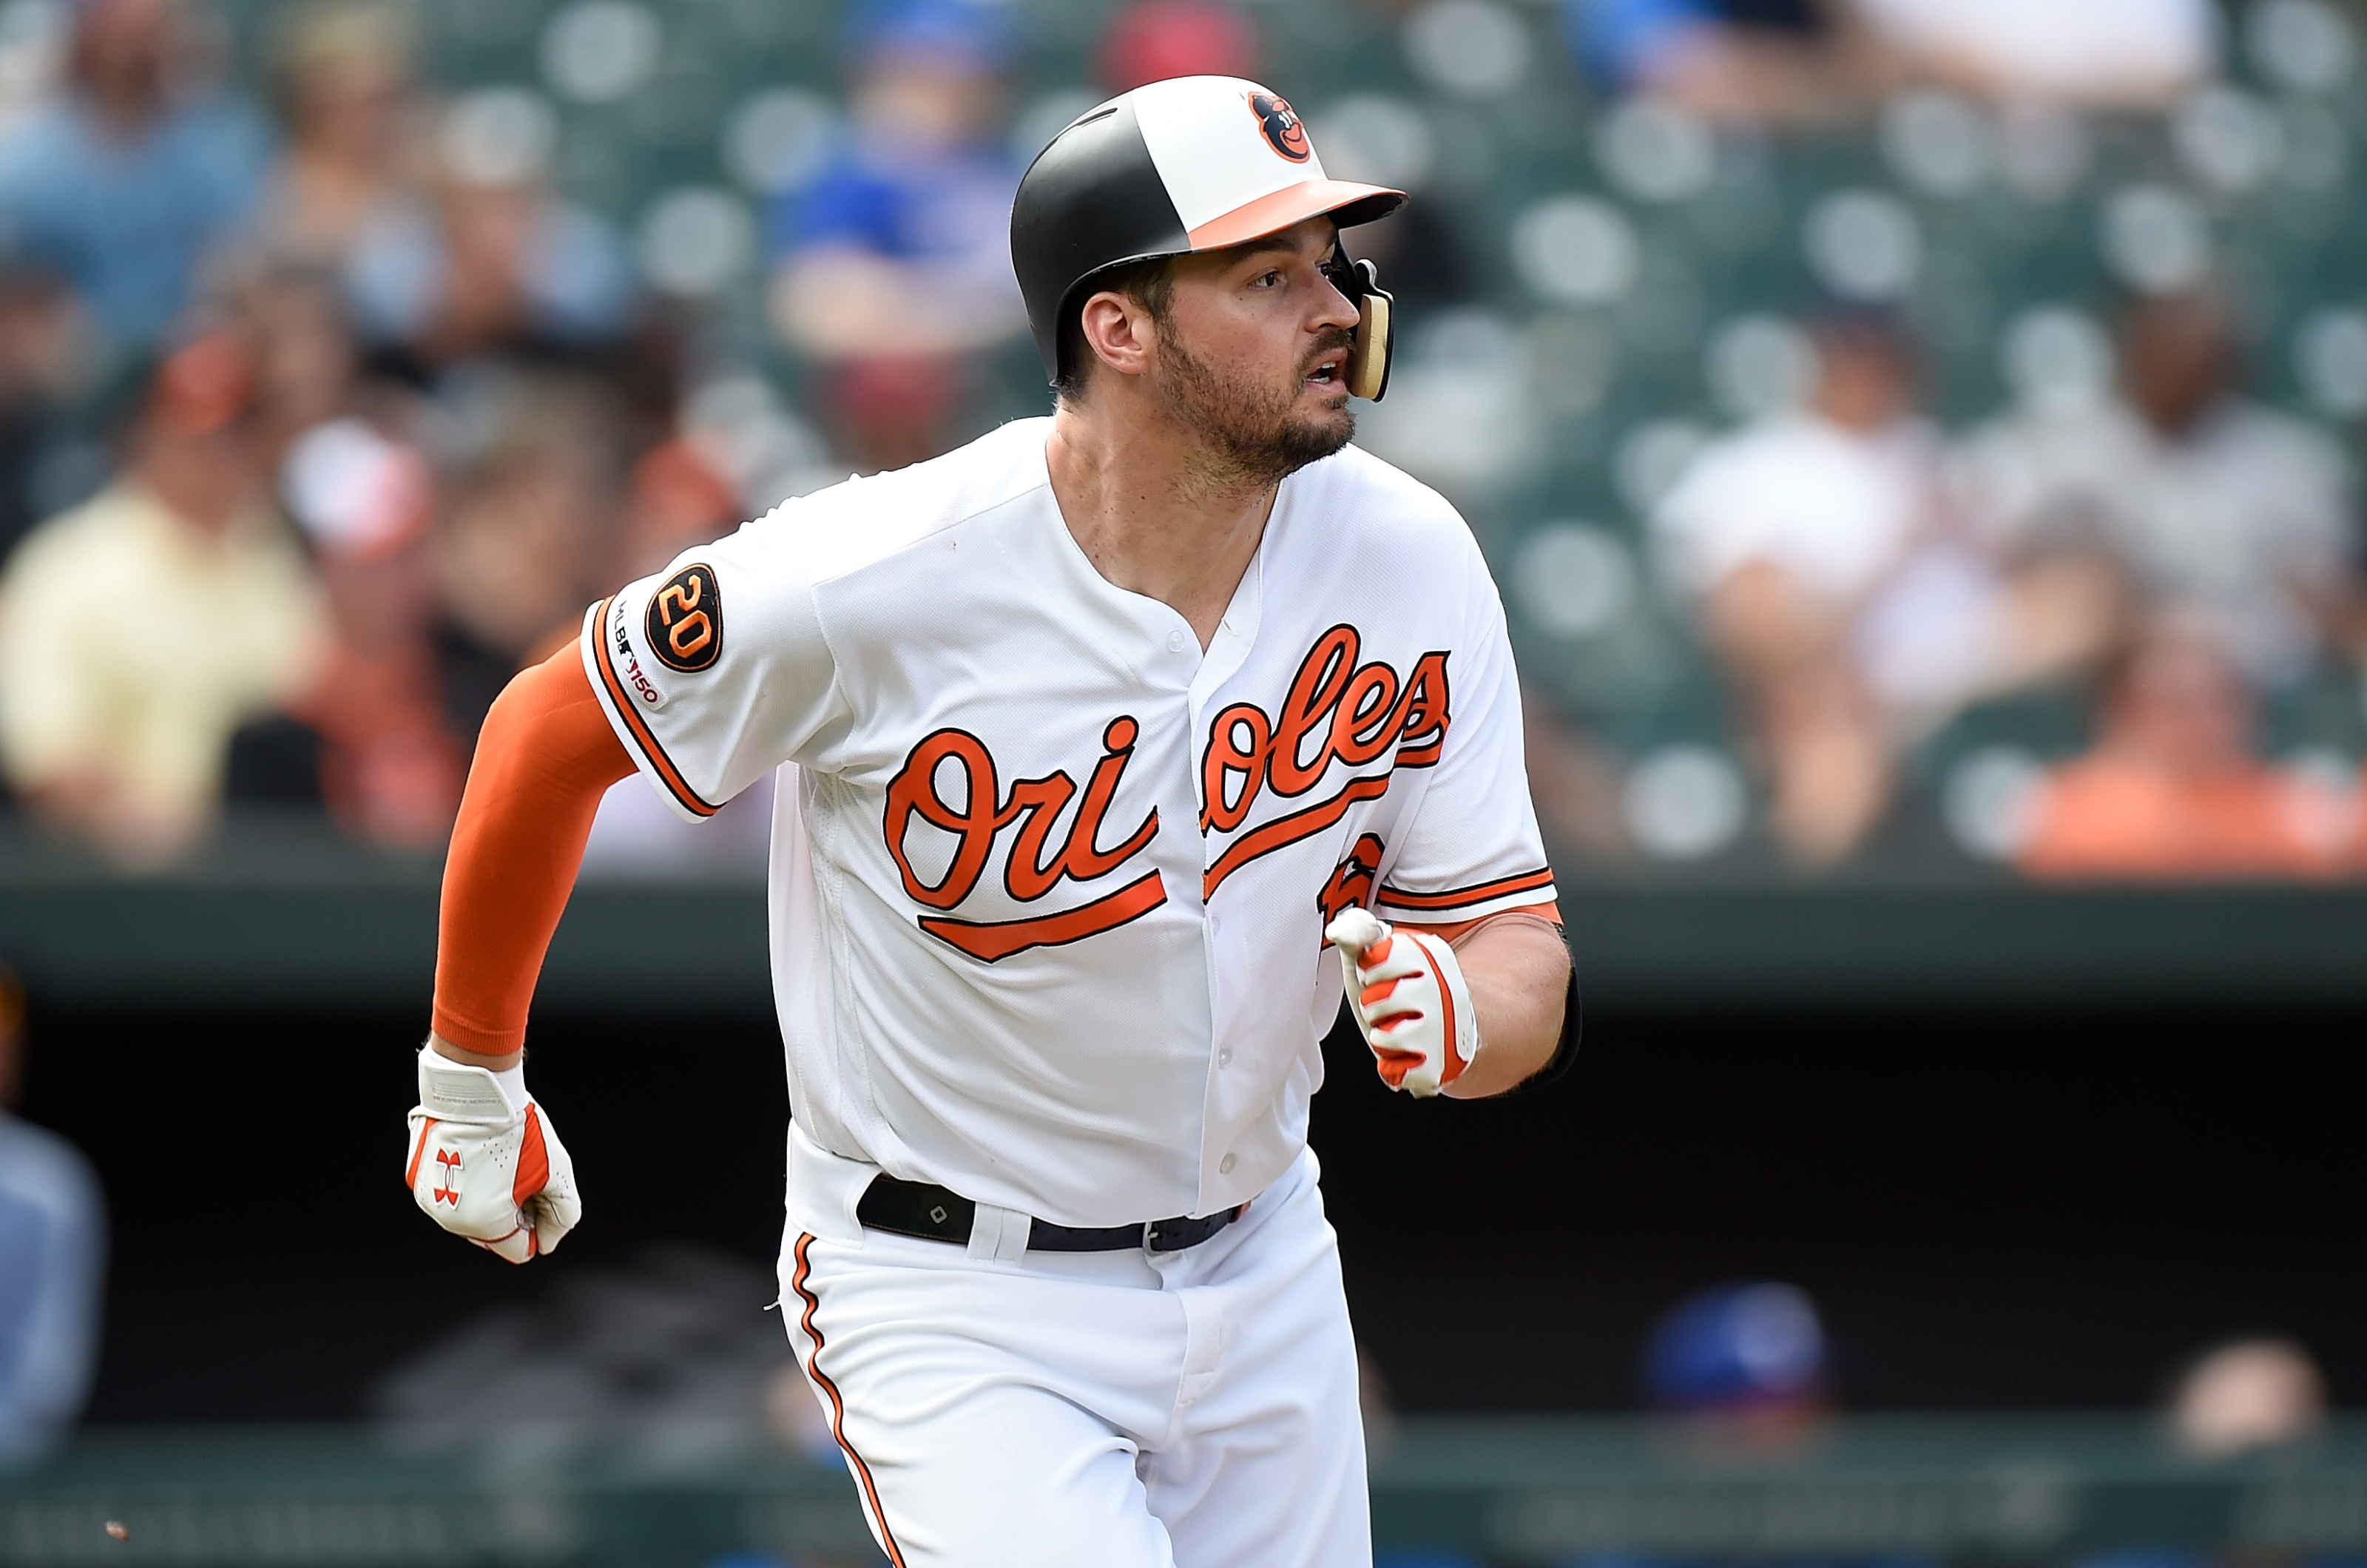 Trey Mancini knew a return to the Orioles was 'off the table.' It